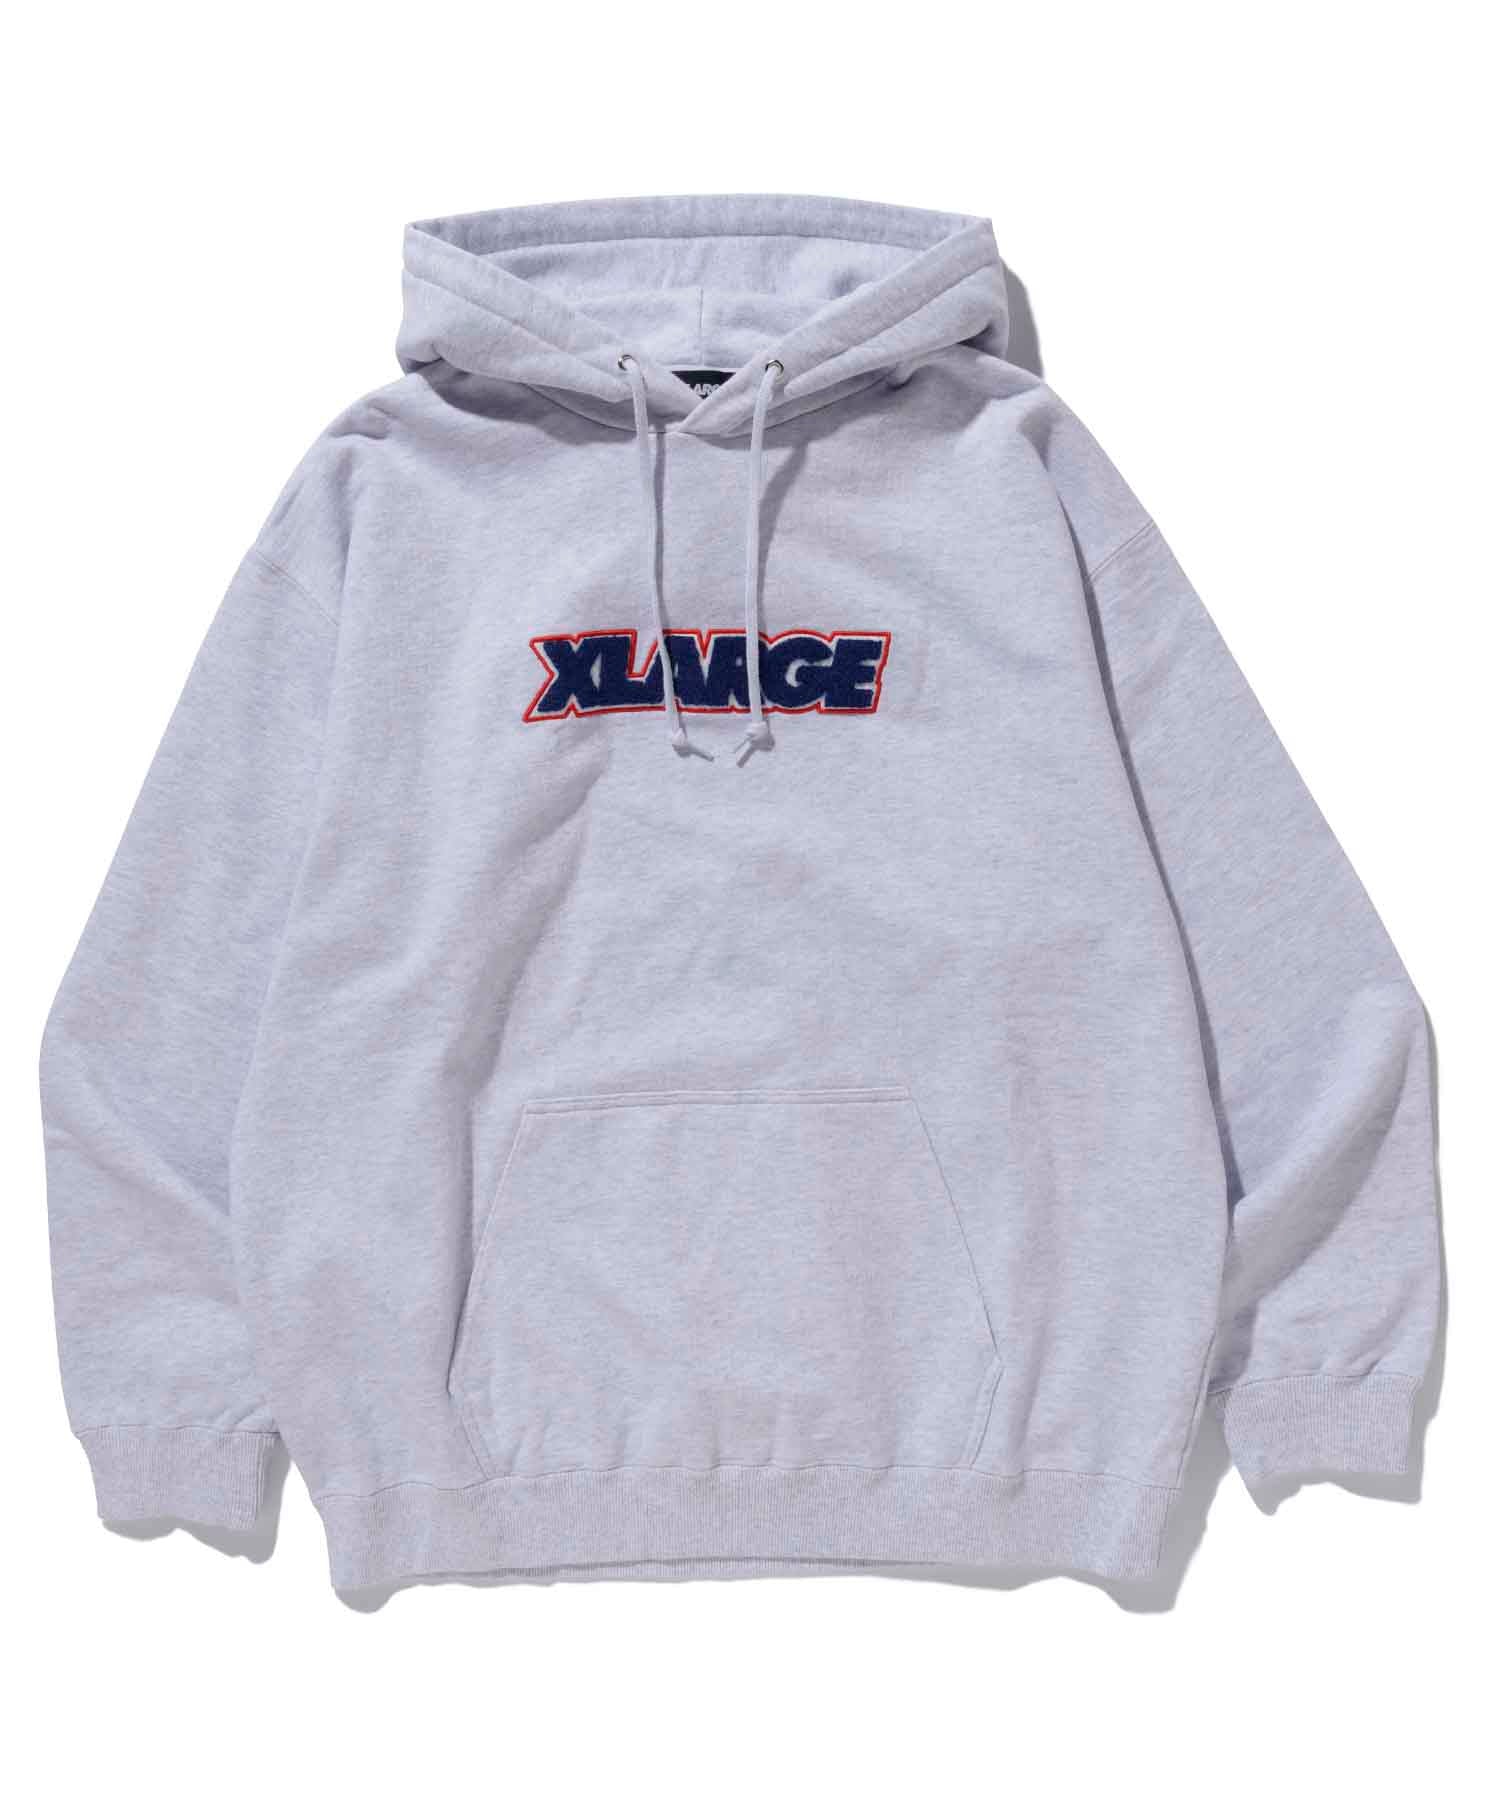 OG TWO TONE PULLOVER HOODED SWEAT XLARGE パーカー フーディー 